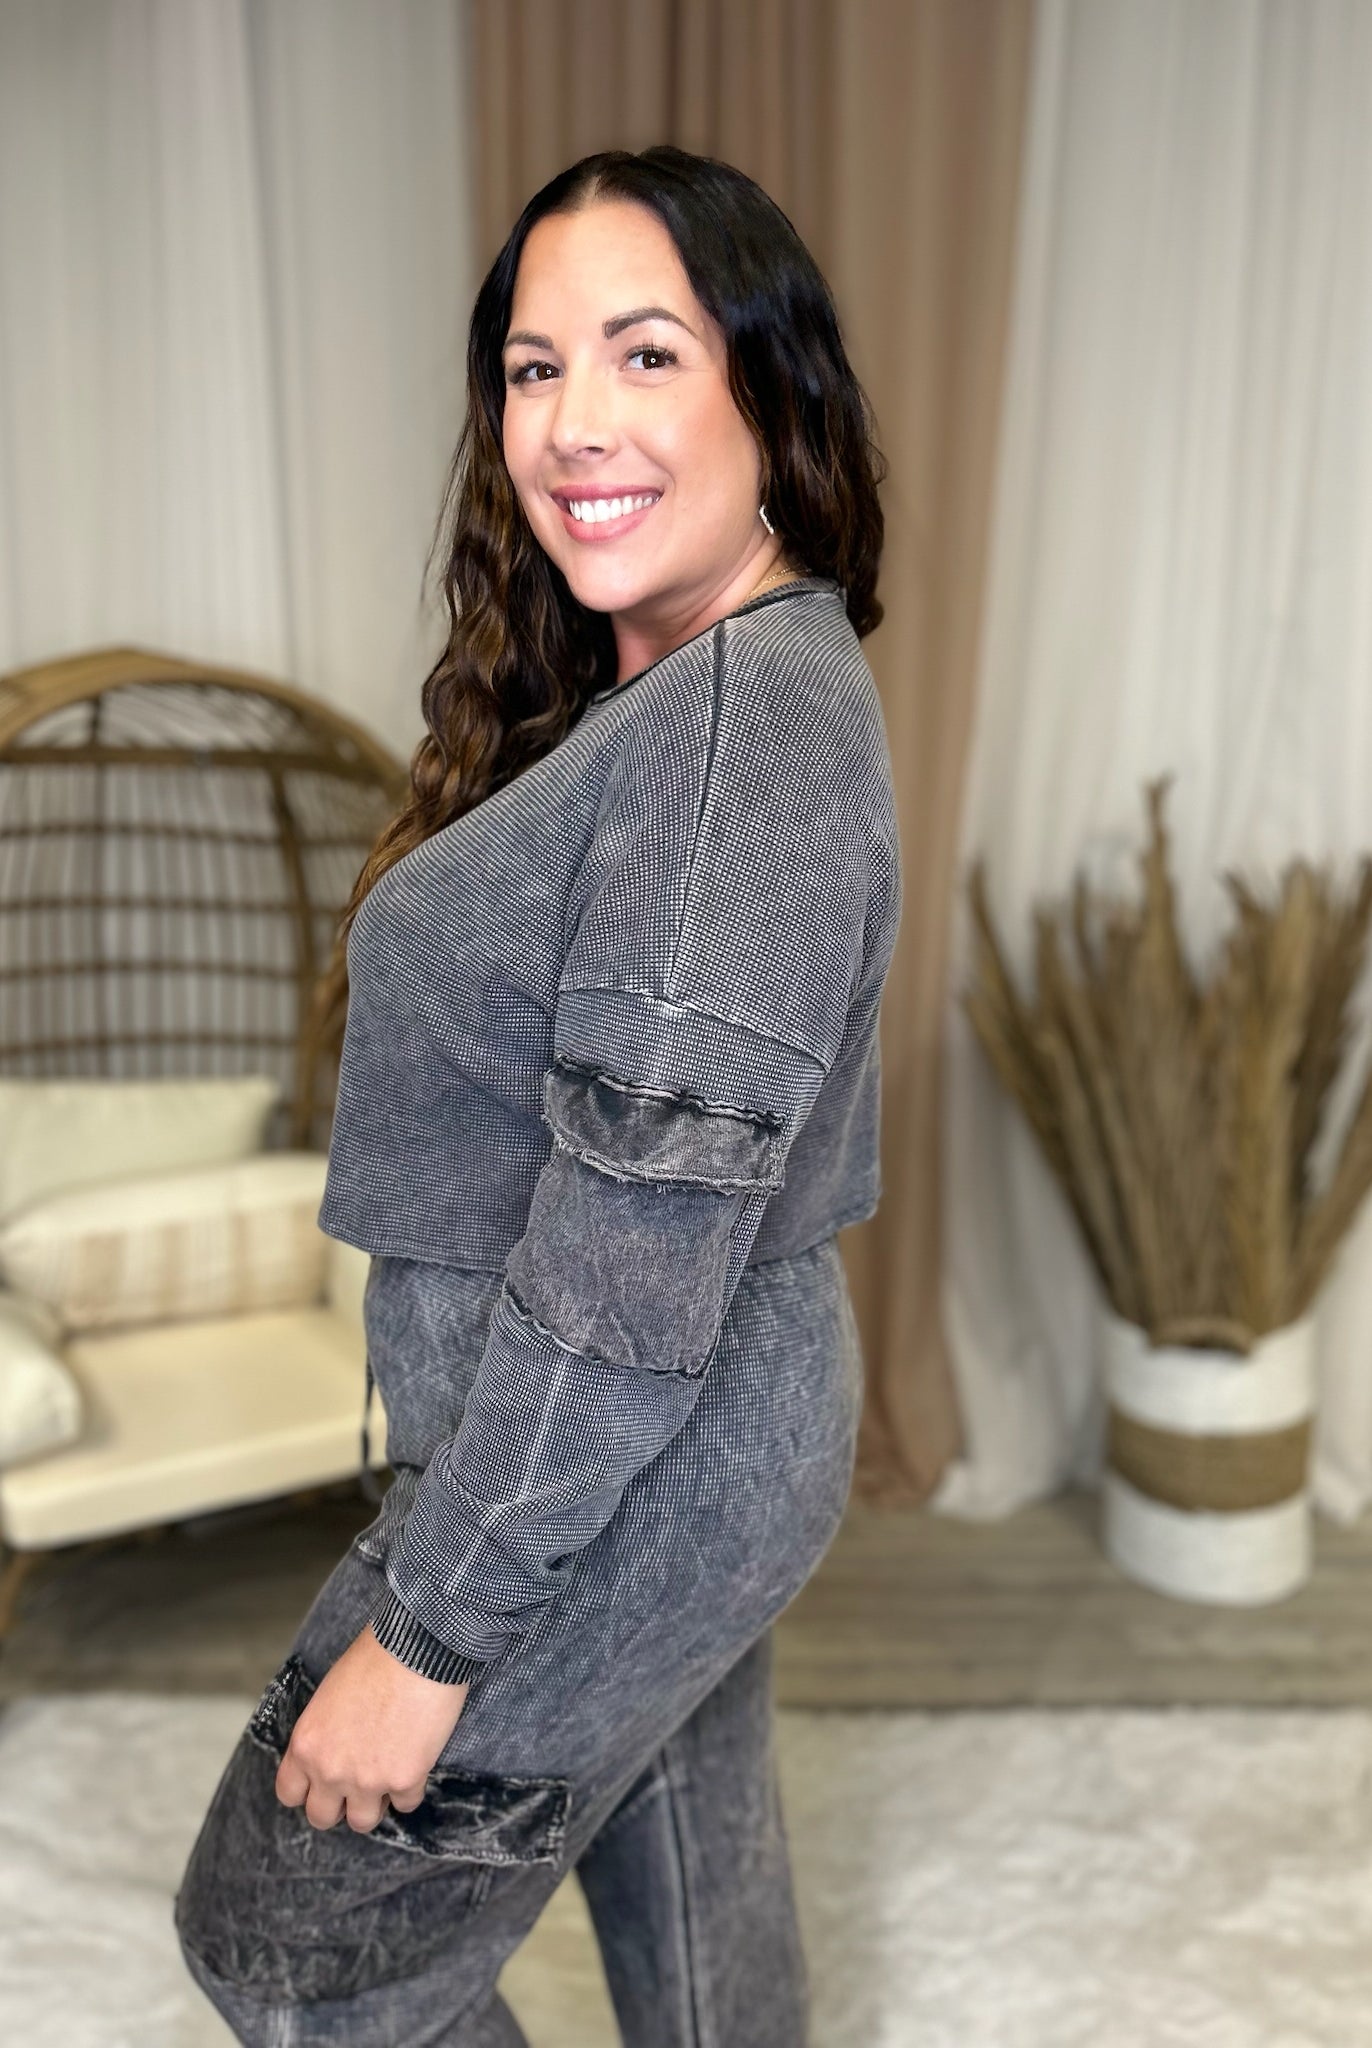 RESTOCK: On a Roll Long Sleeve Top-120 Long Sleeve Tops-J. Her-Heathered Boho Boutique, Women's Fashion and Accessories in Palmetto, FL